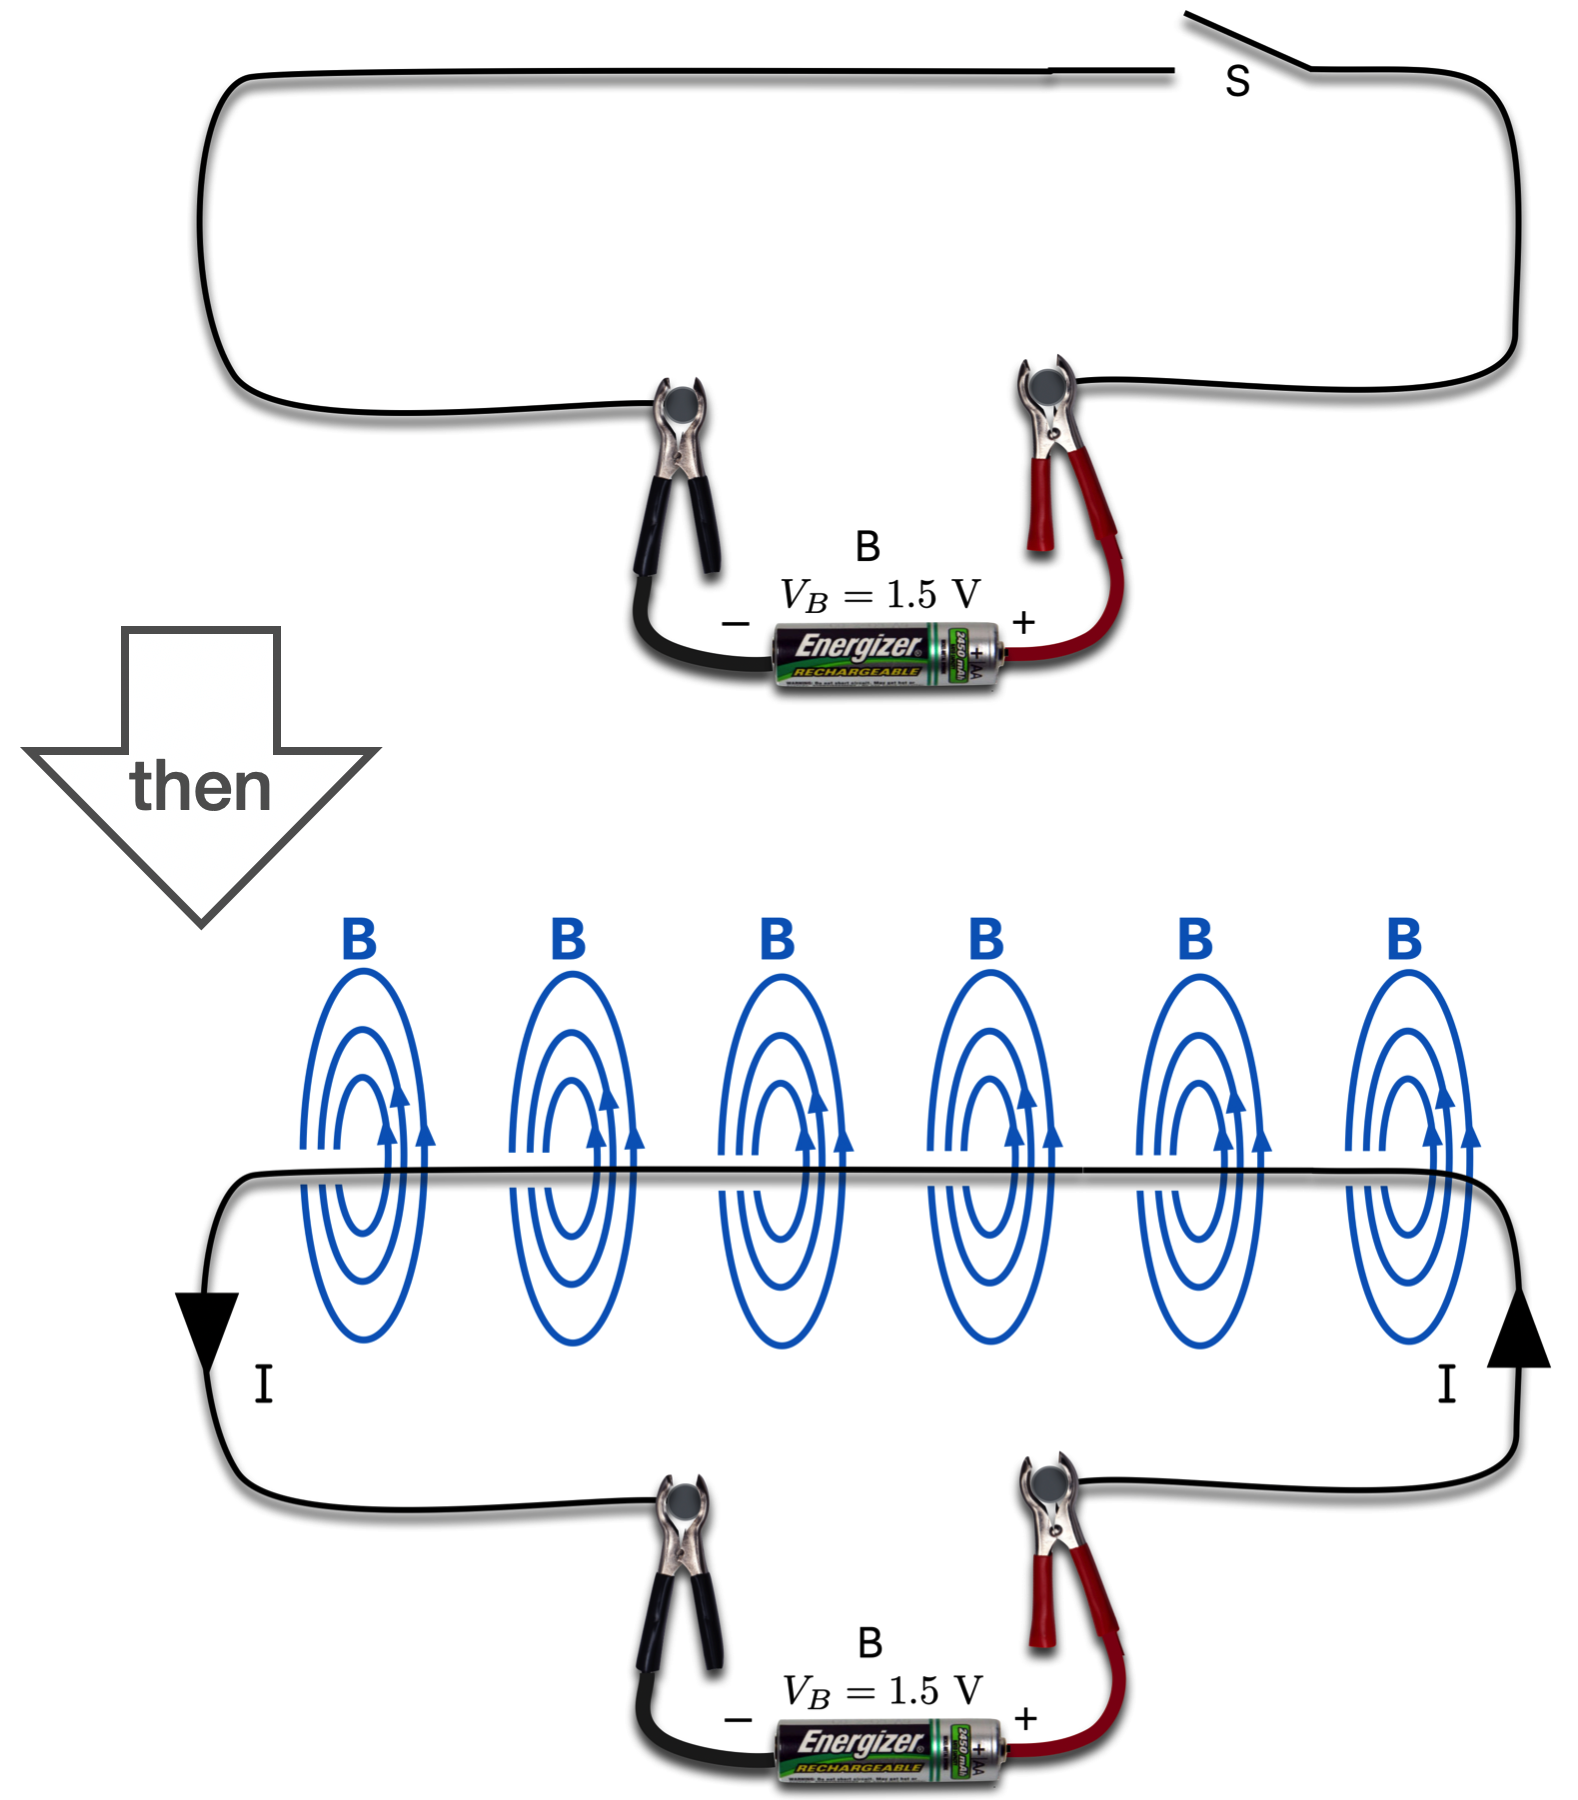 At the top, a switch is open and no current flows. At the bottom, the switch is closed and the current creates a magnetic field circulating around the wire throughout.